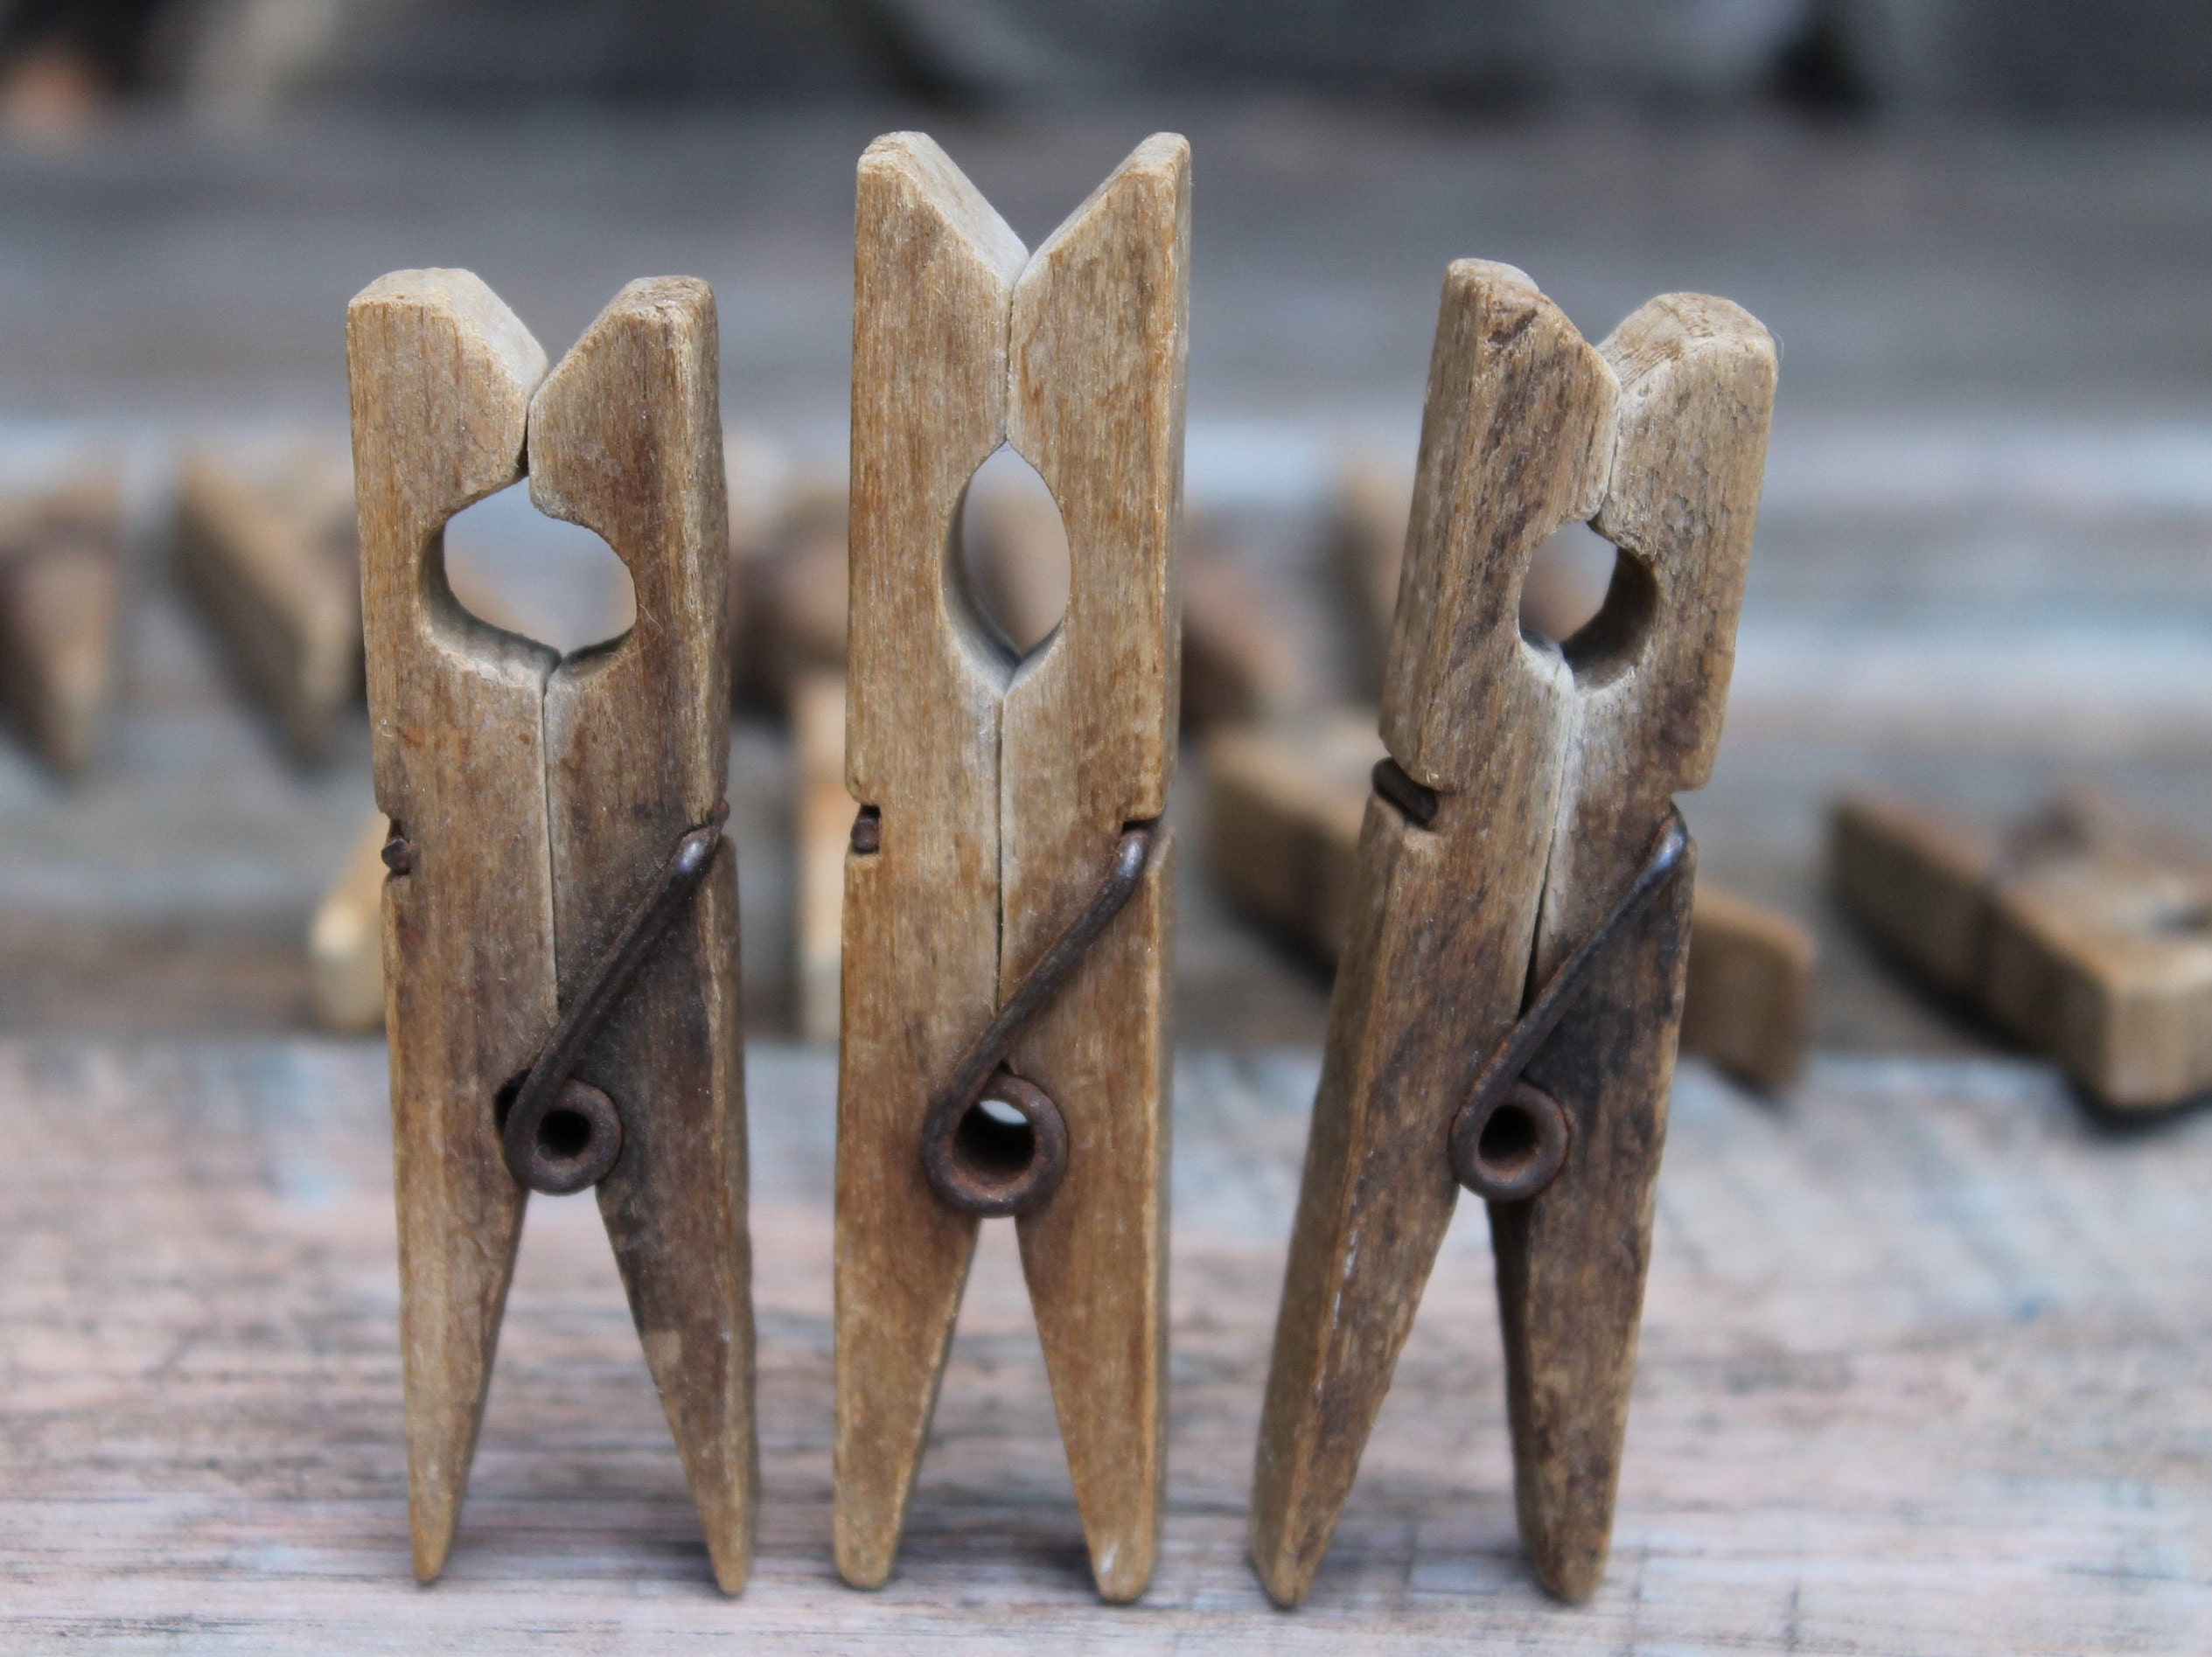 Vintage Wood Wooden Clothes Pins Clothespins 6